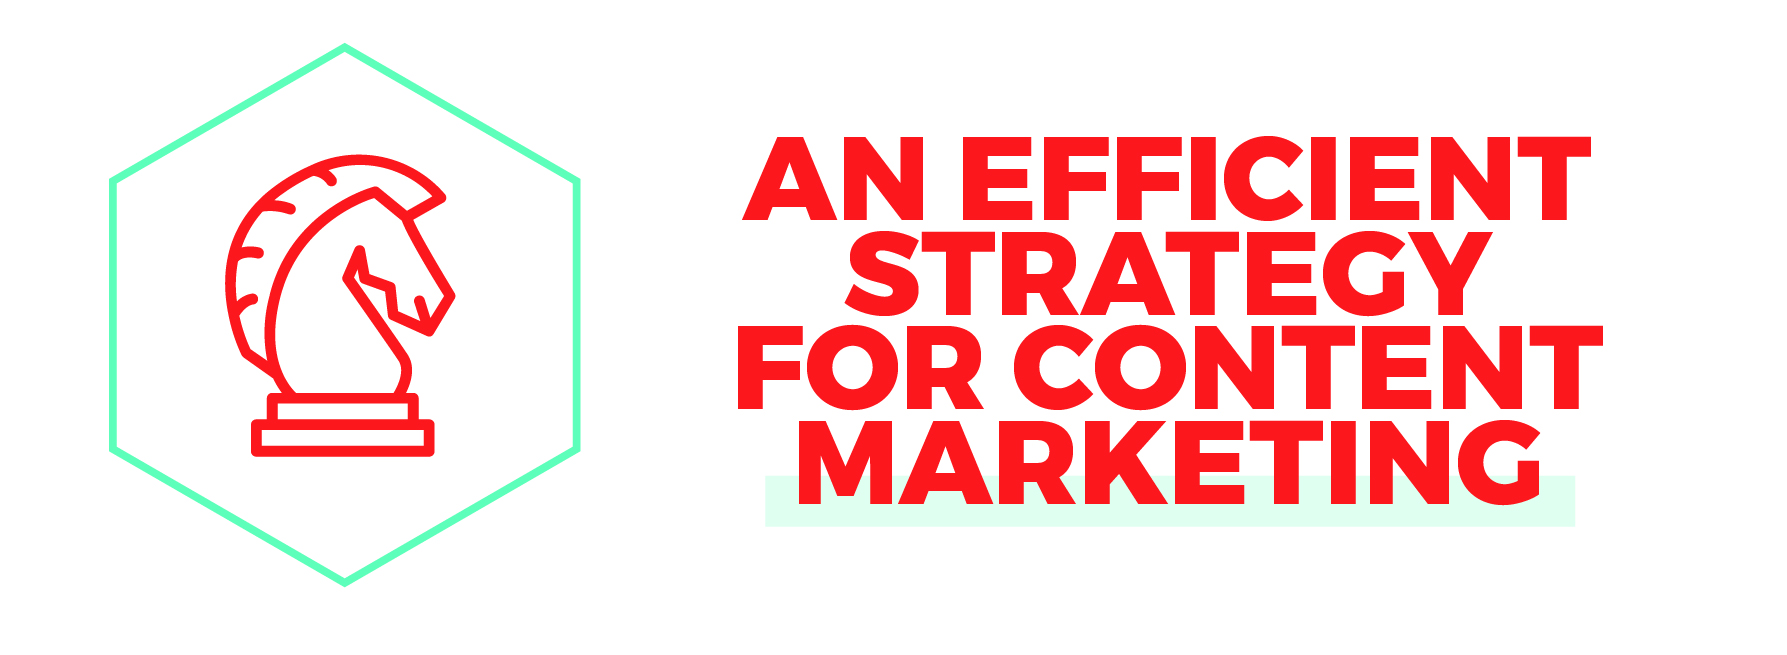 An Effective Strategy for Content Marketing